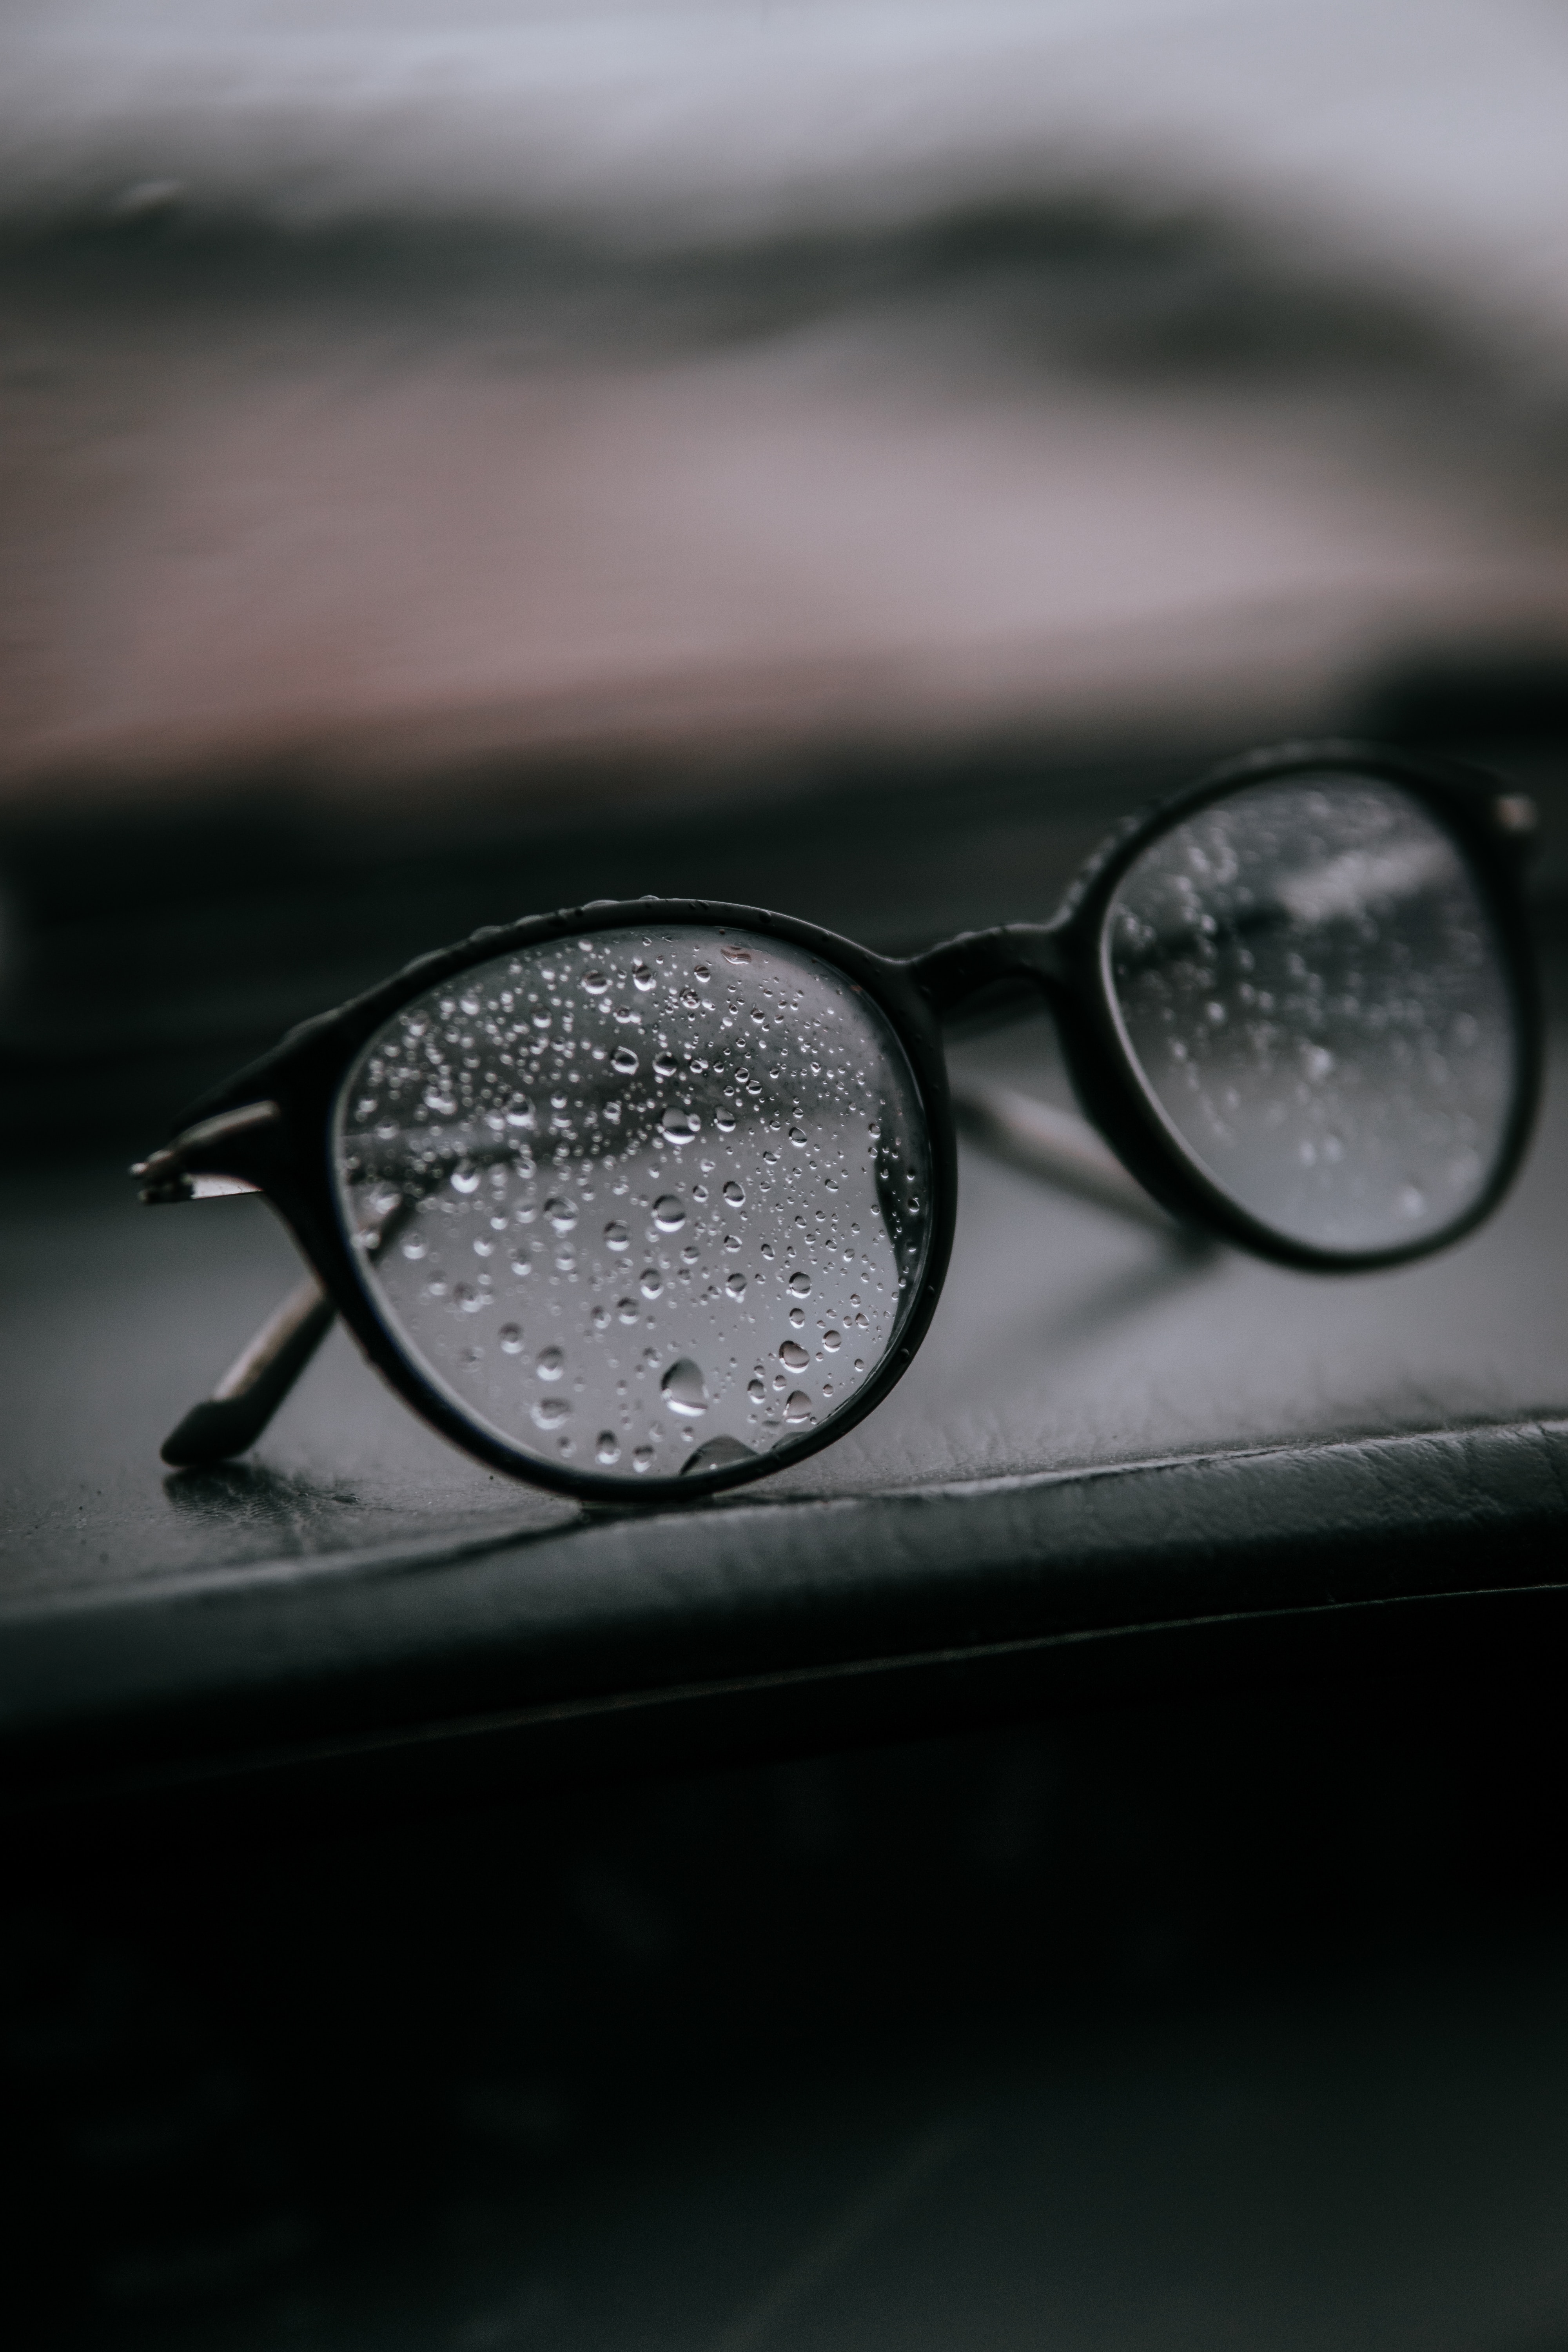 miscellanea, drops, miscellaneous, wet, glass, glasses, spectacles Full HD